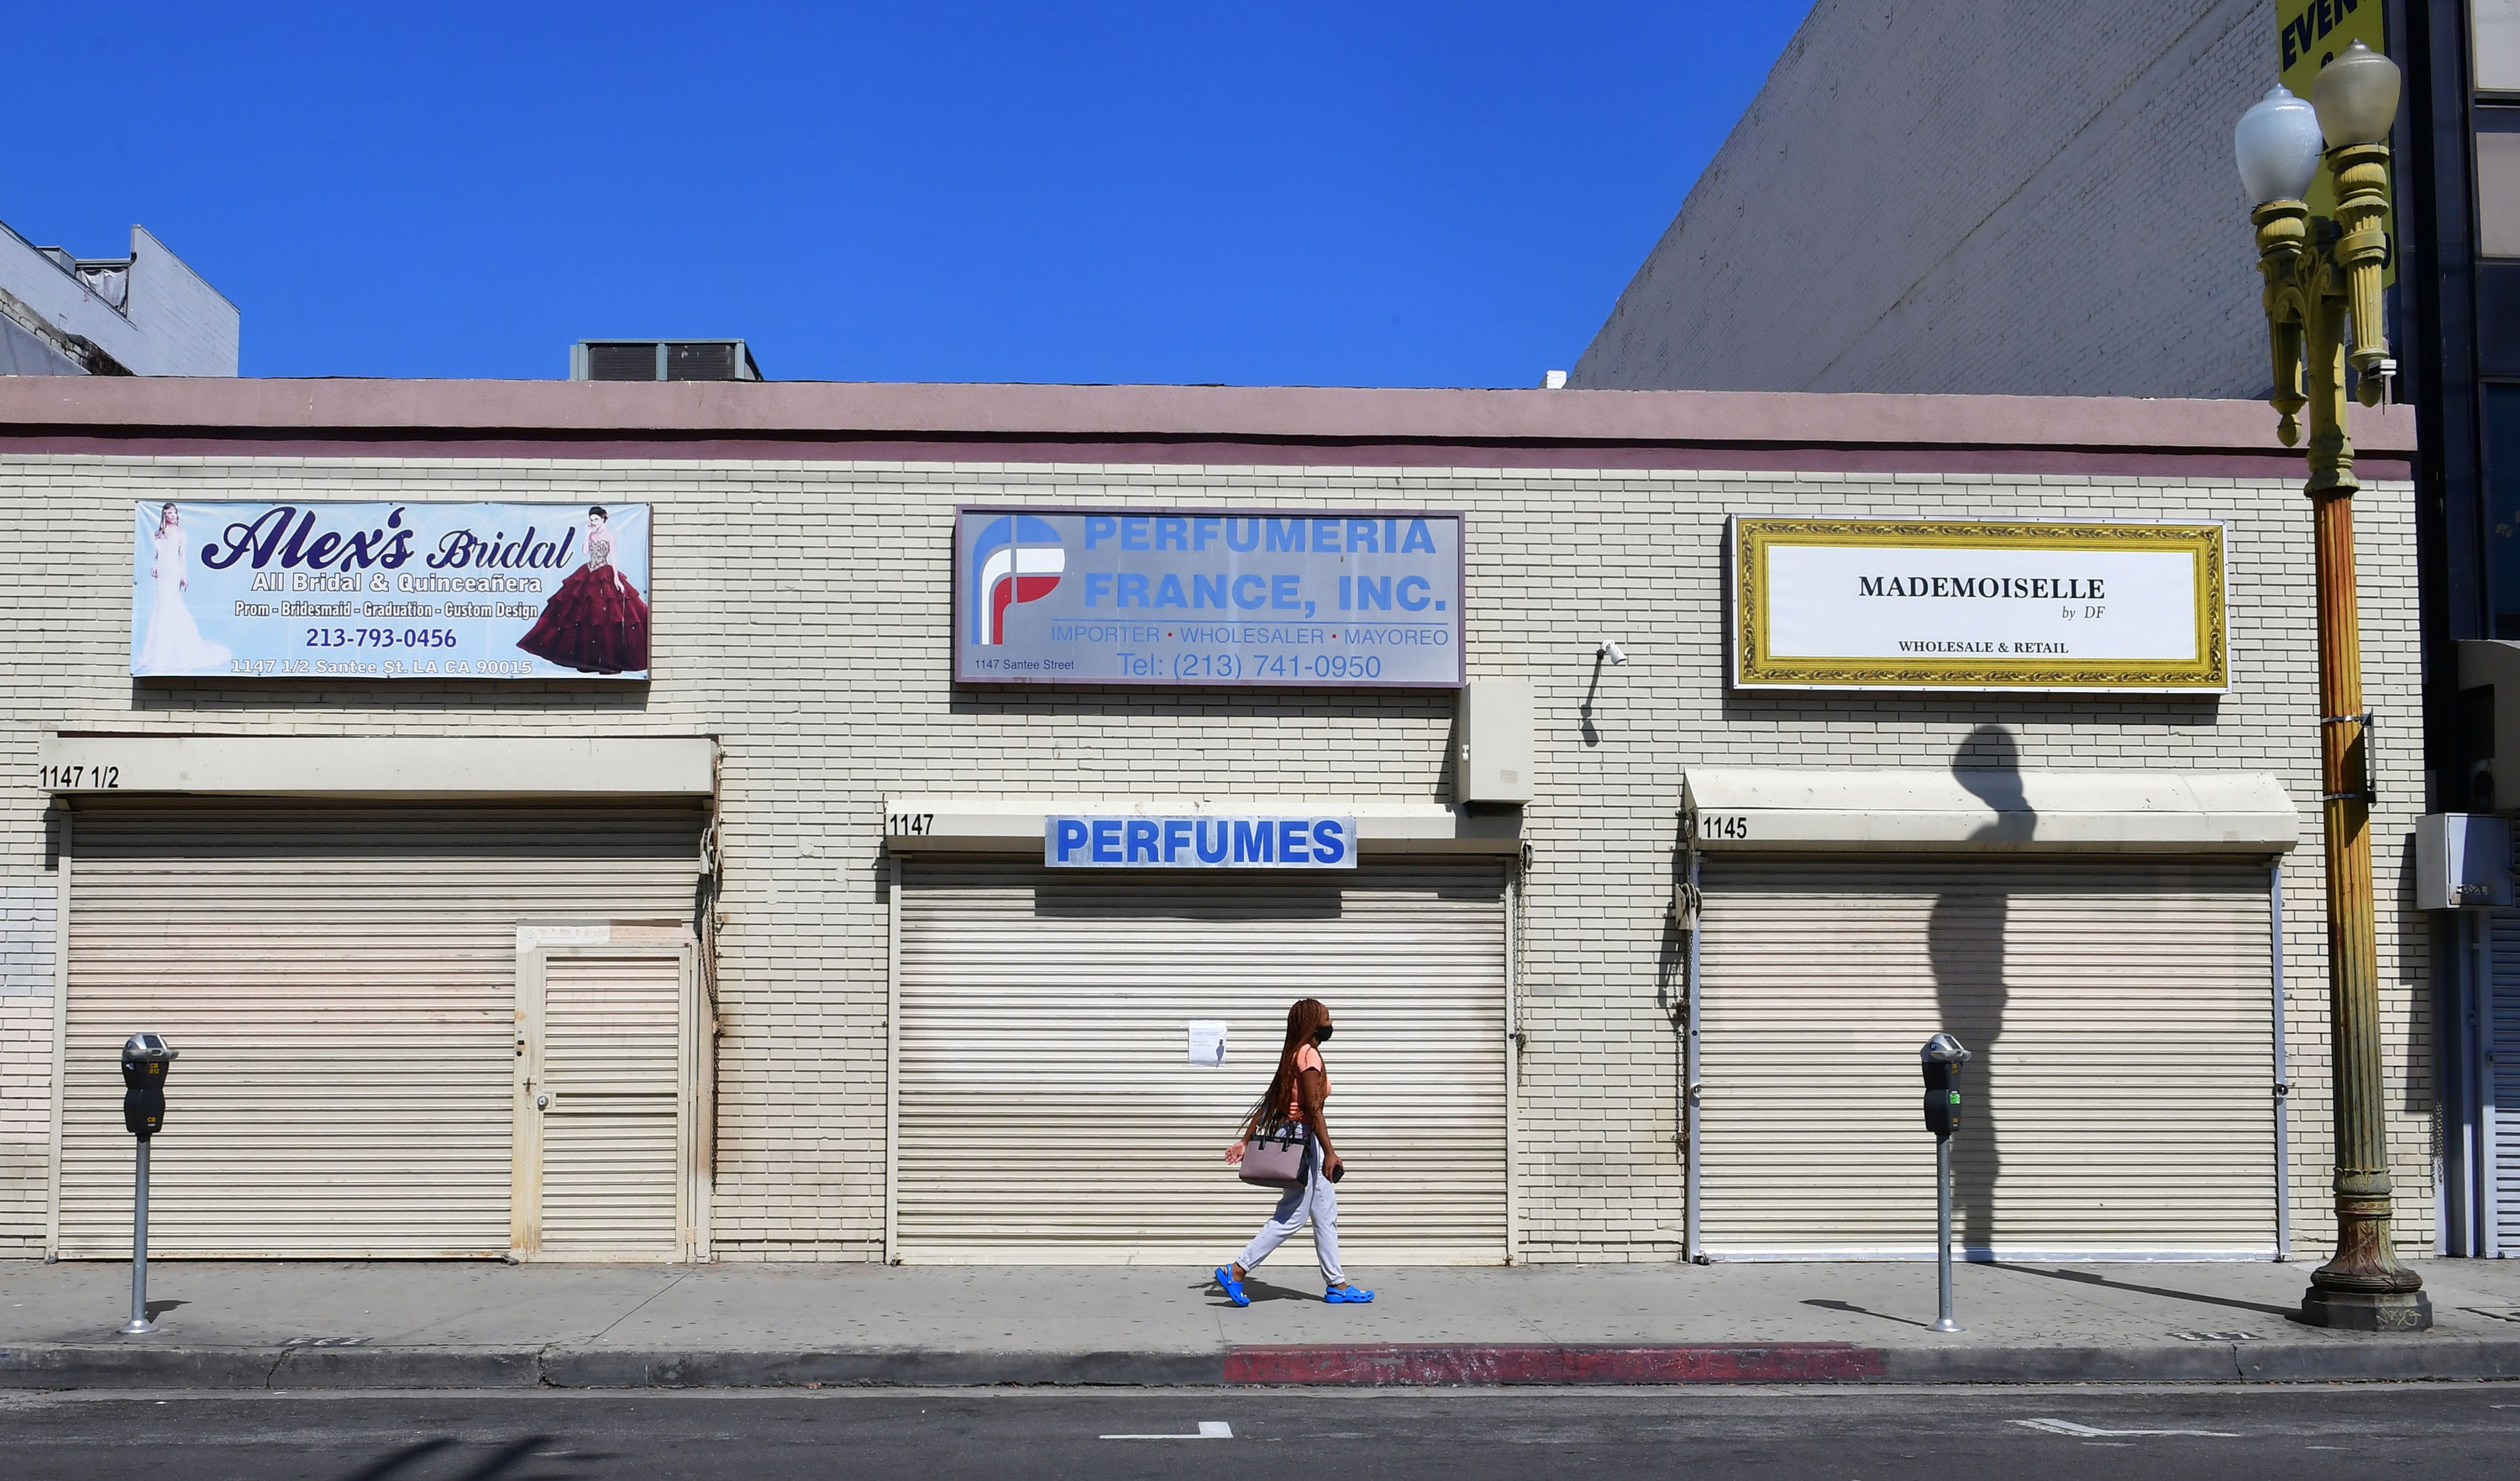 A woman walks past closed shopfronts in what would be a normally busy fashion district in Los Angeles on May 4.